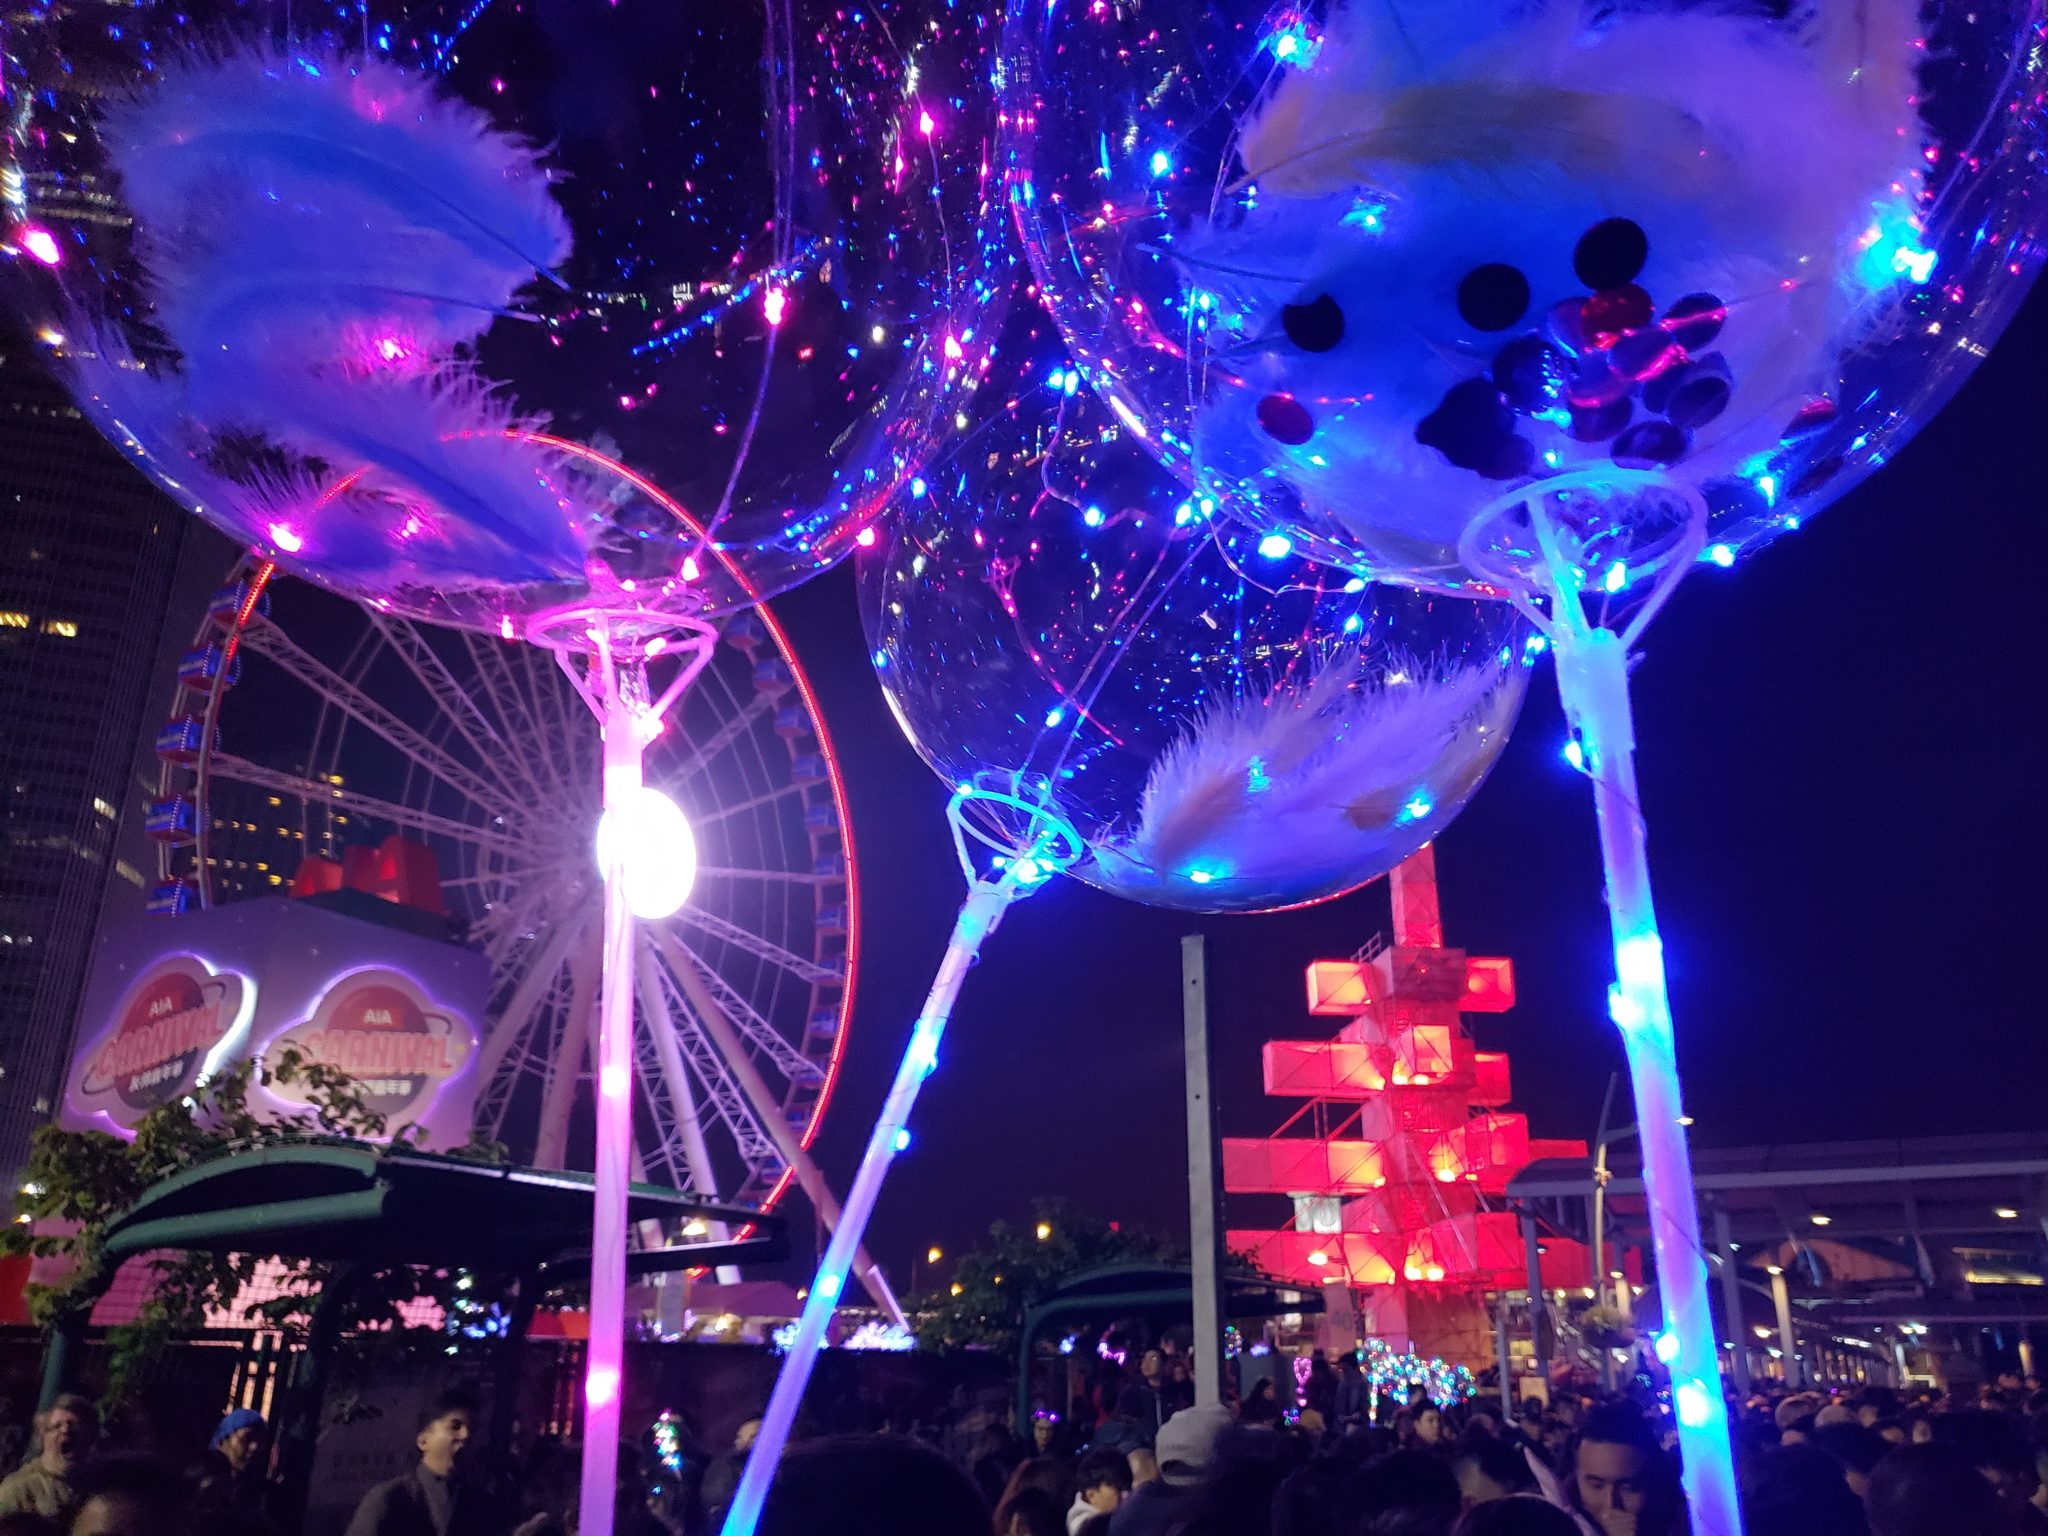 a group of balloons with lights and a ferris wheel at night